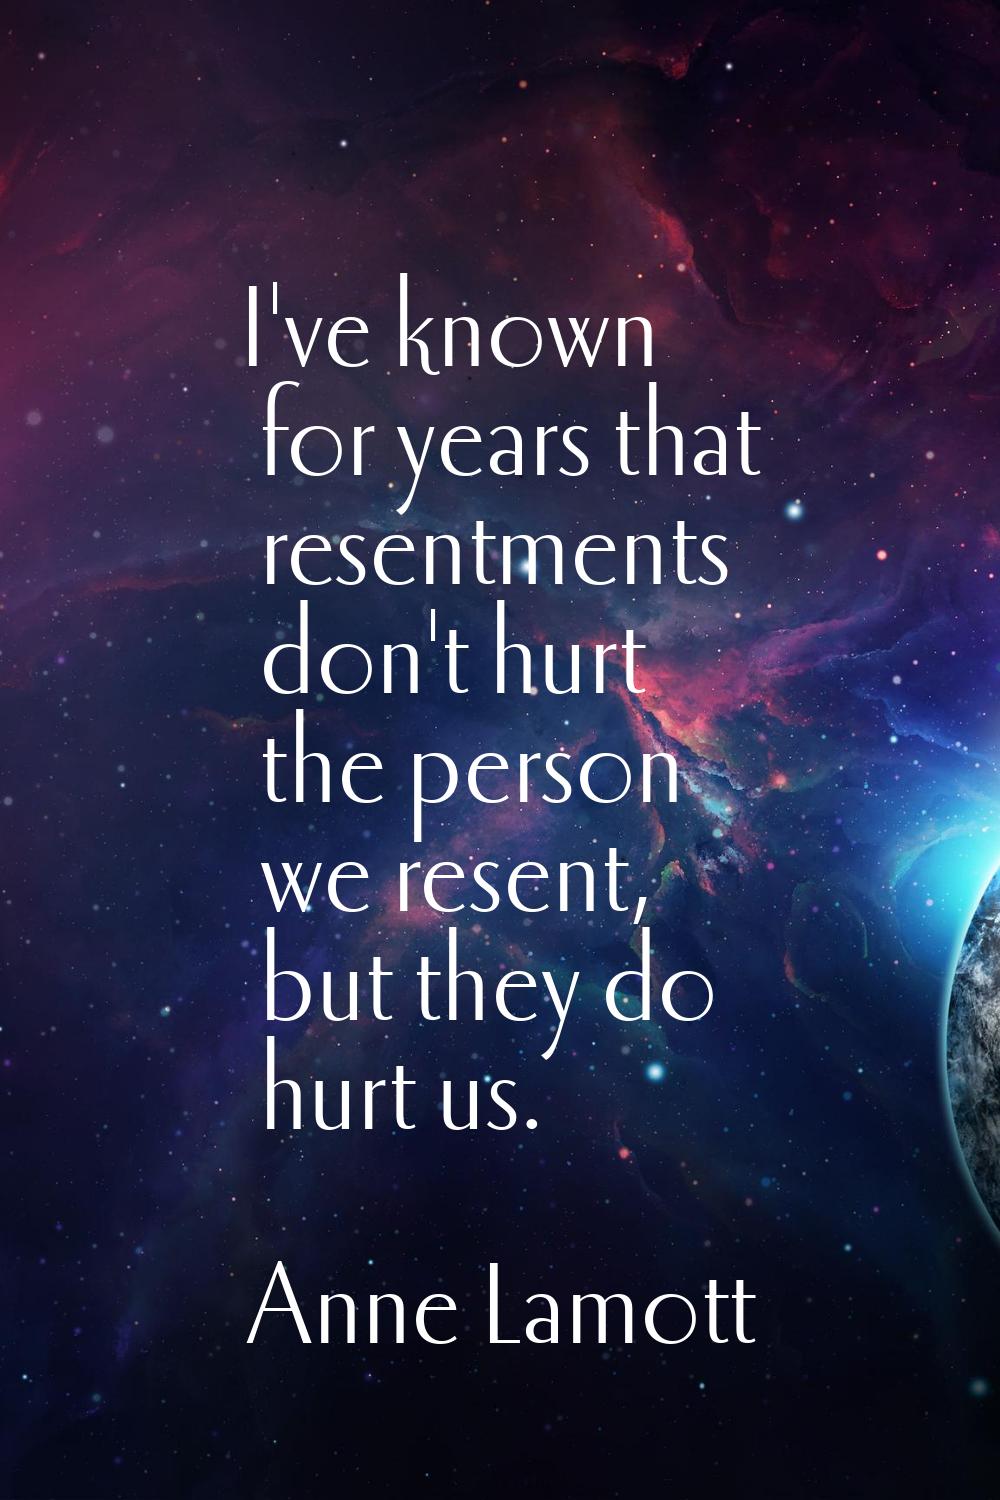 I've known for years that resentments don't hurt the person we resent, but they do hurt us.